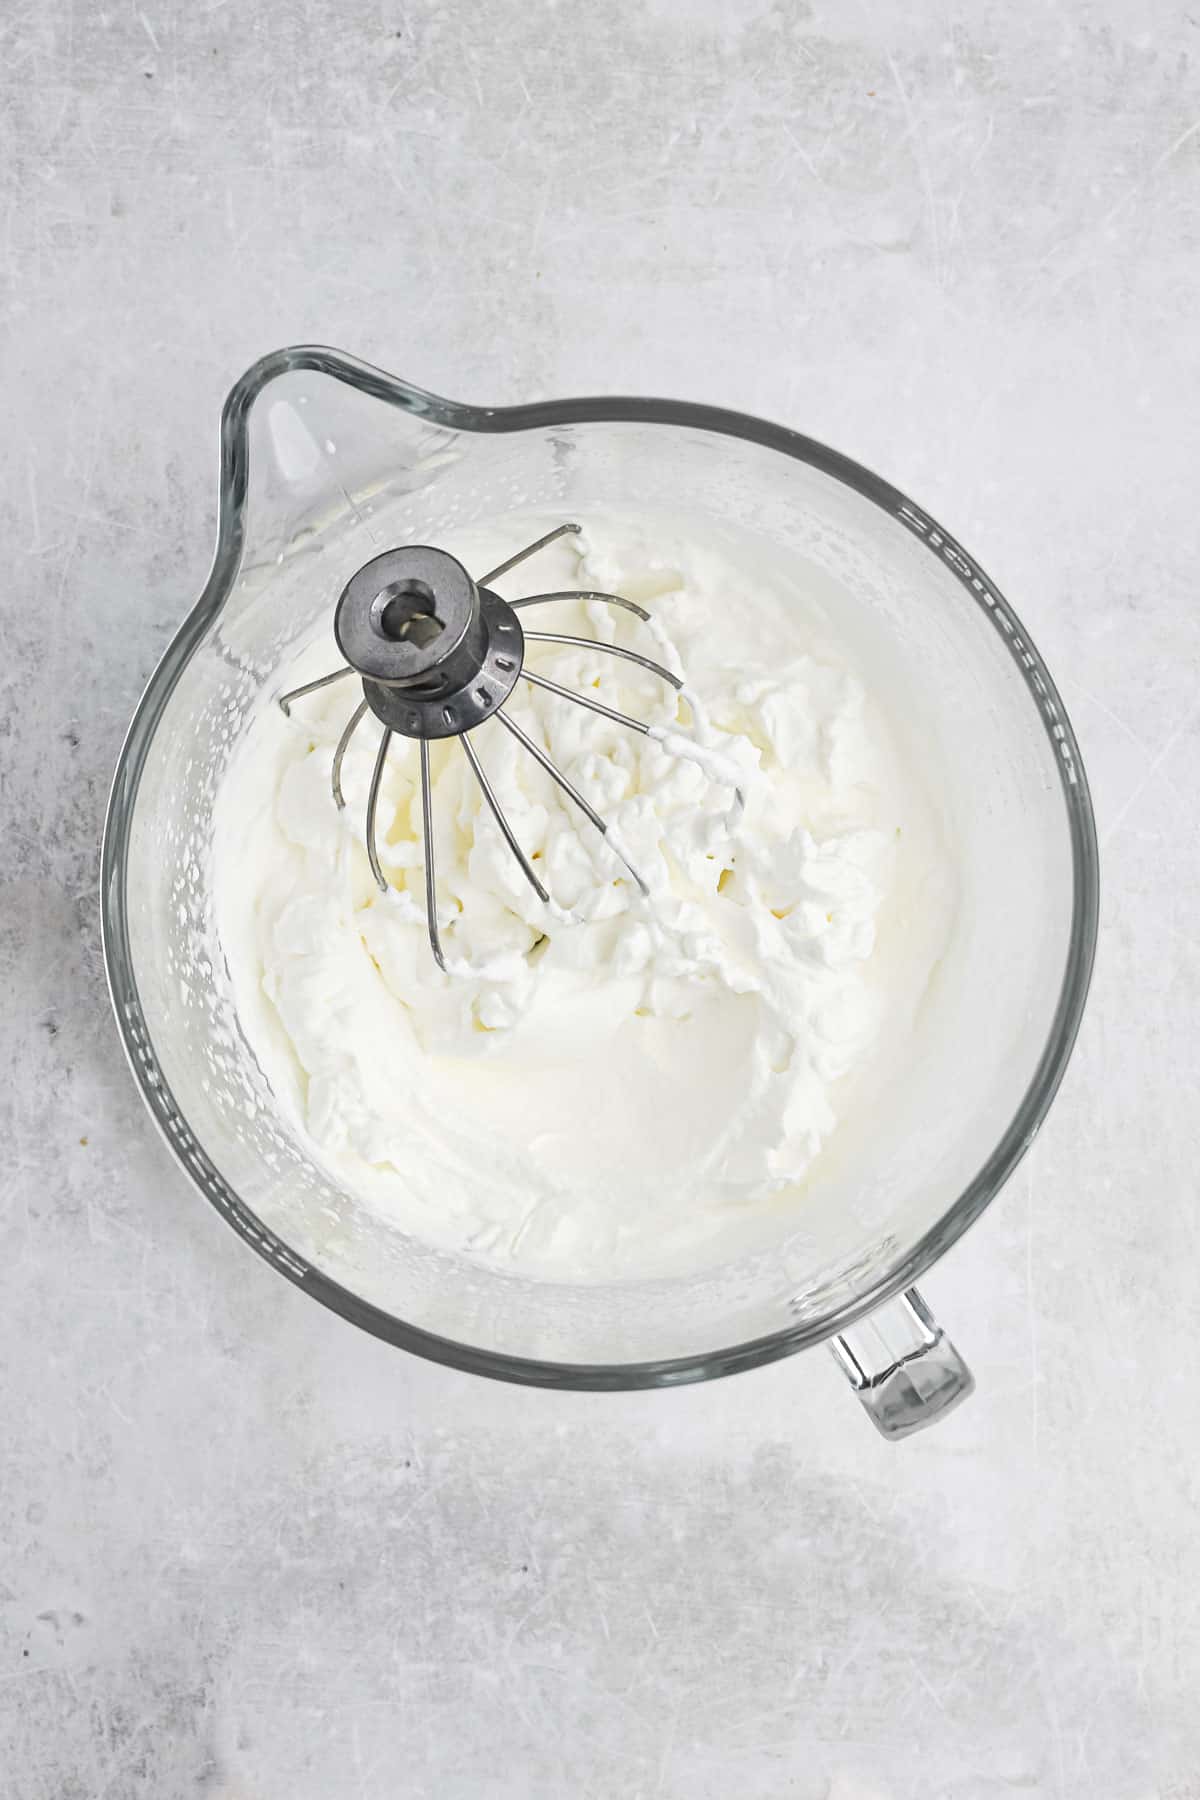 Heavy whipping cream in a mixing bowl